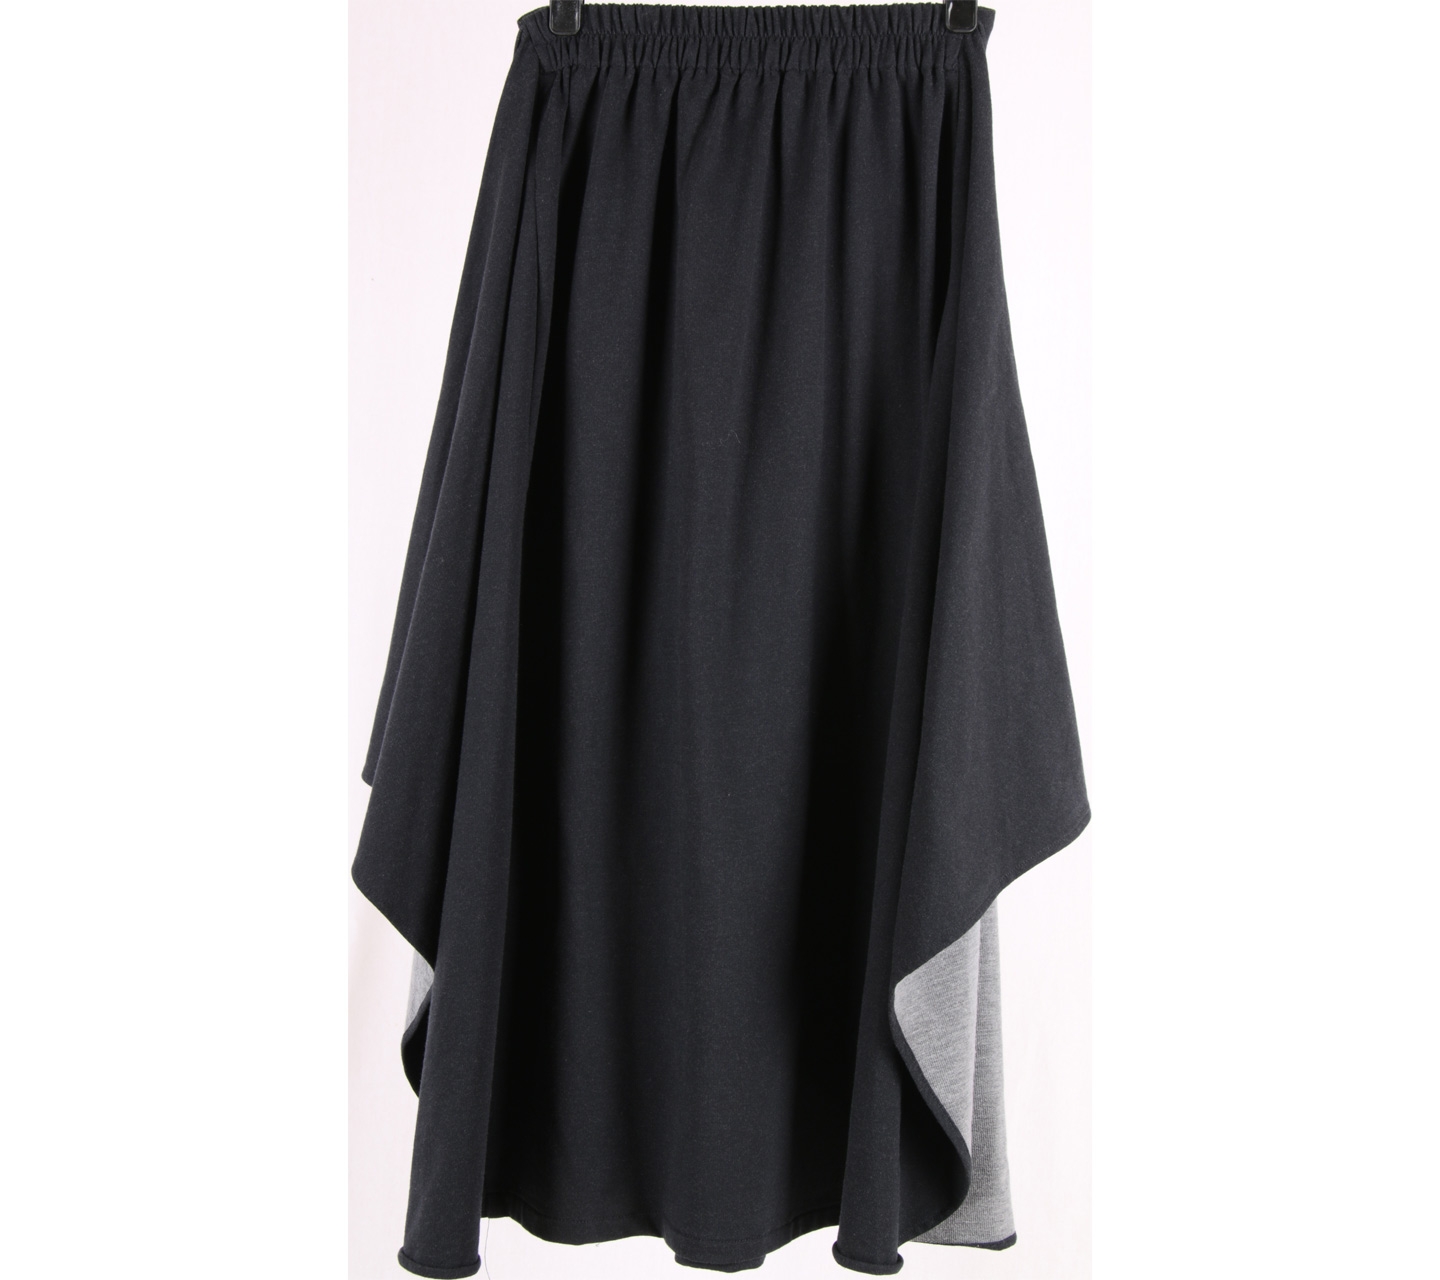 Mine Yours Everyone's Black And Grey Tied Skirt